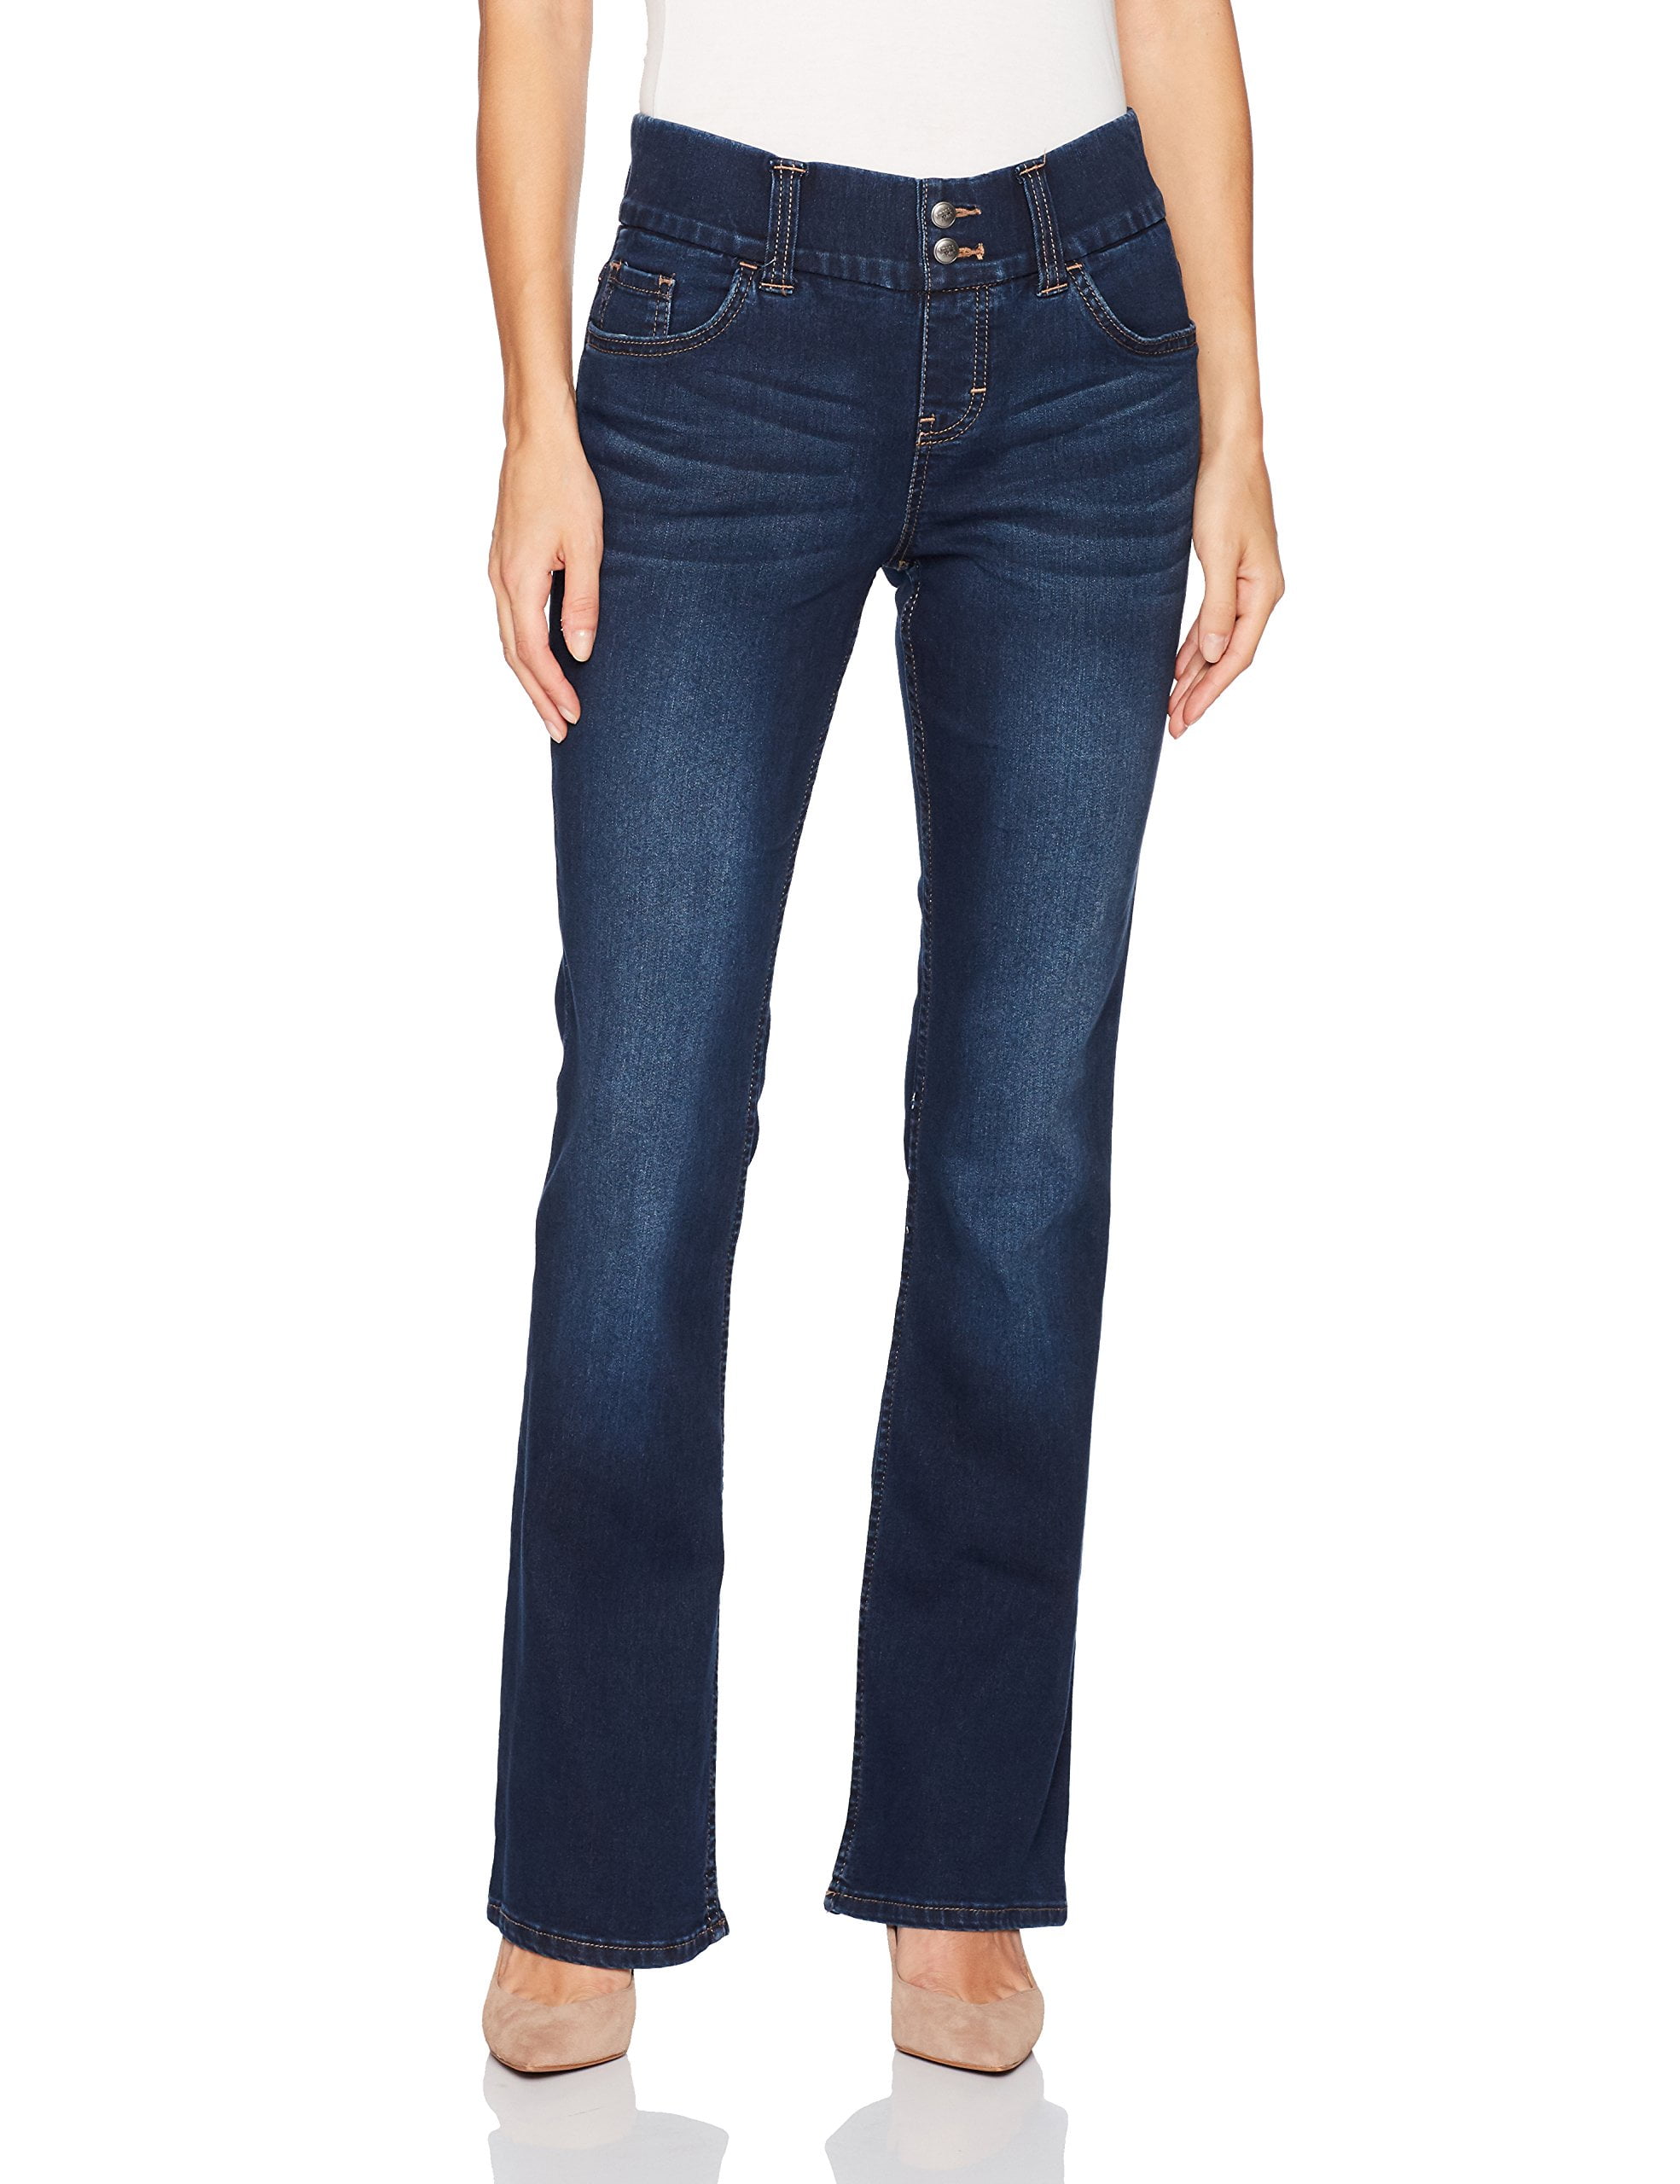 Lee Womens Petite Stretch Pull-On Bootcut Jeans - Walmart.com